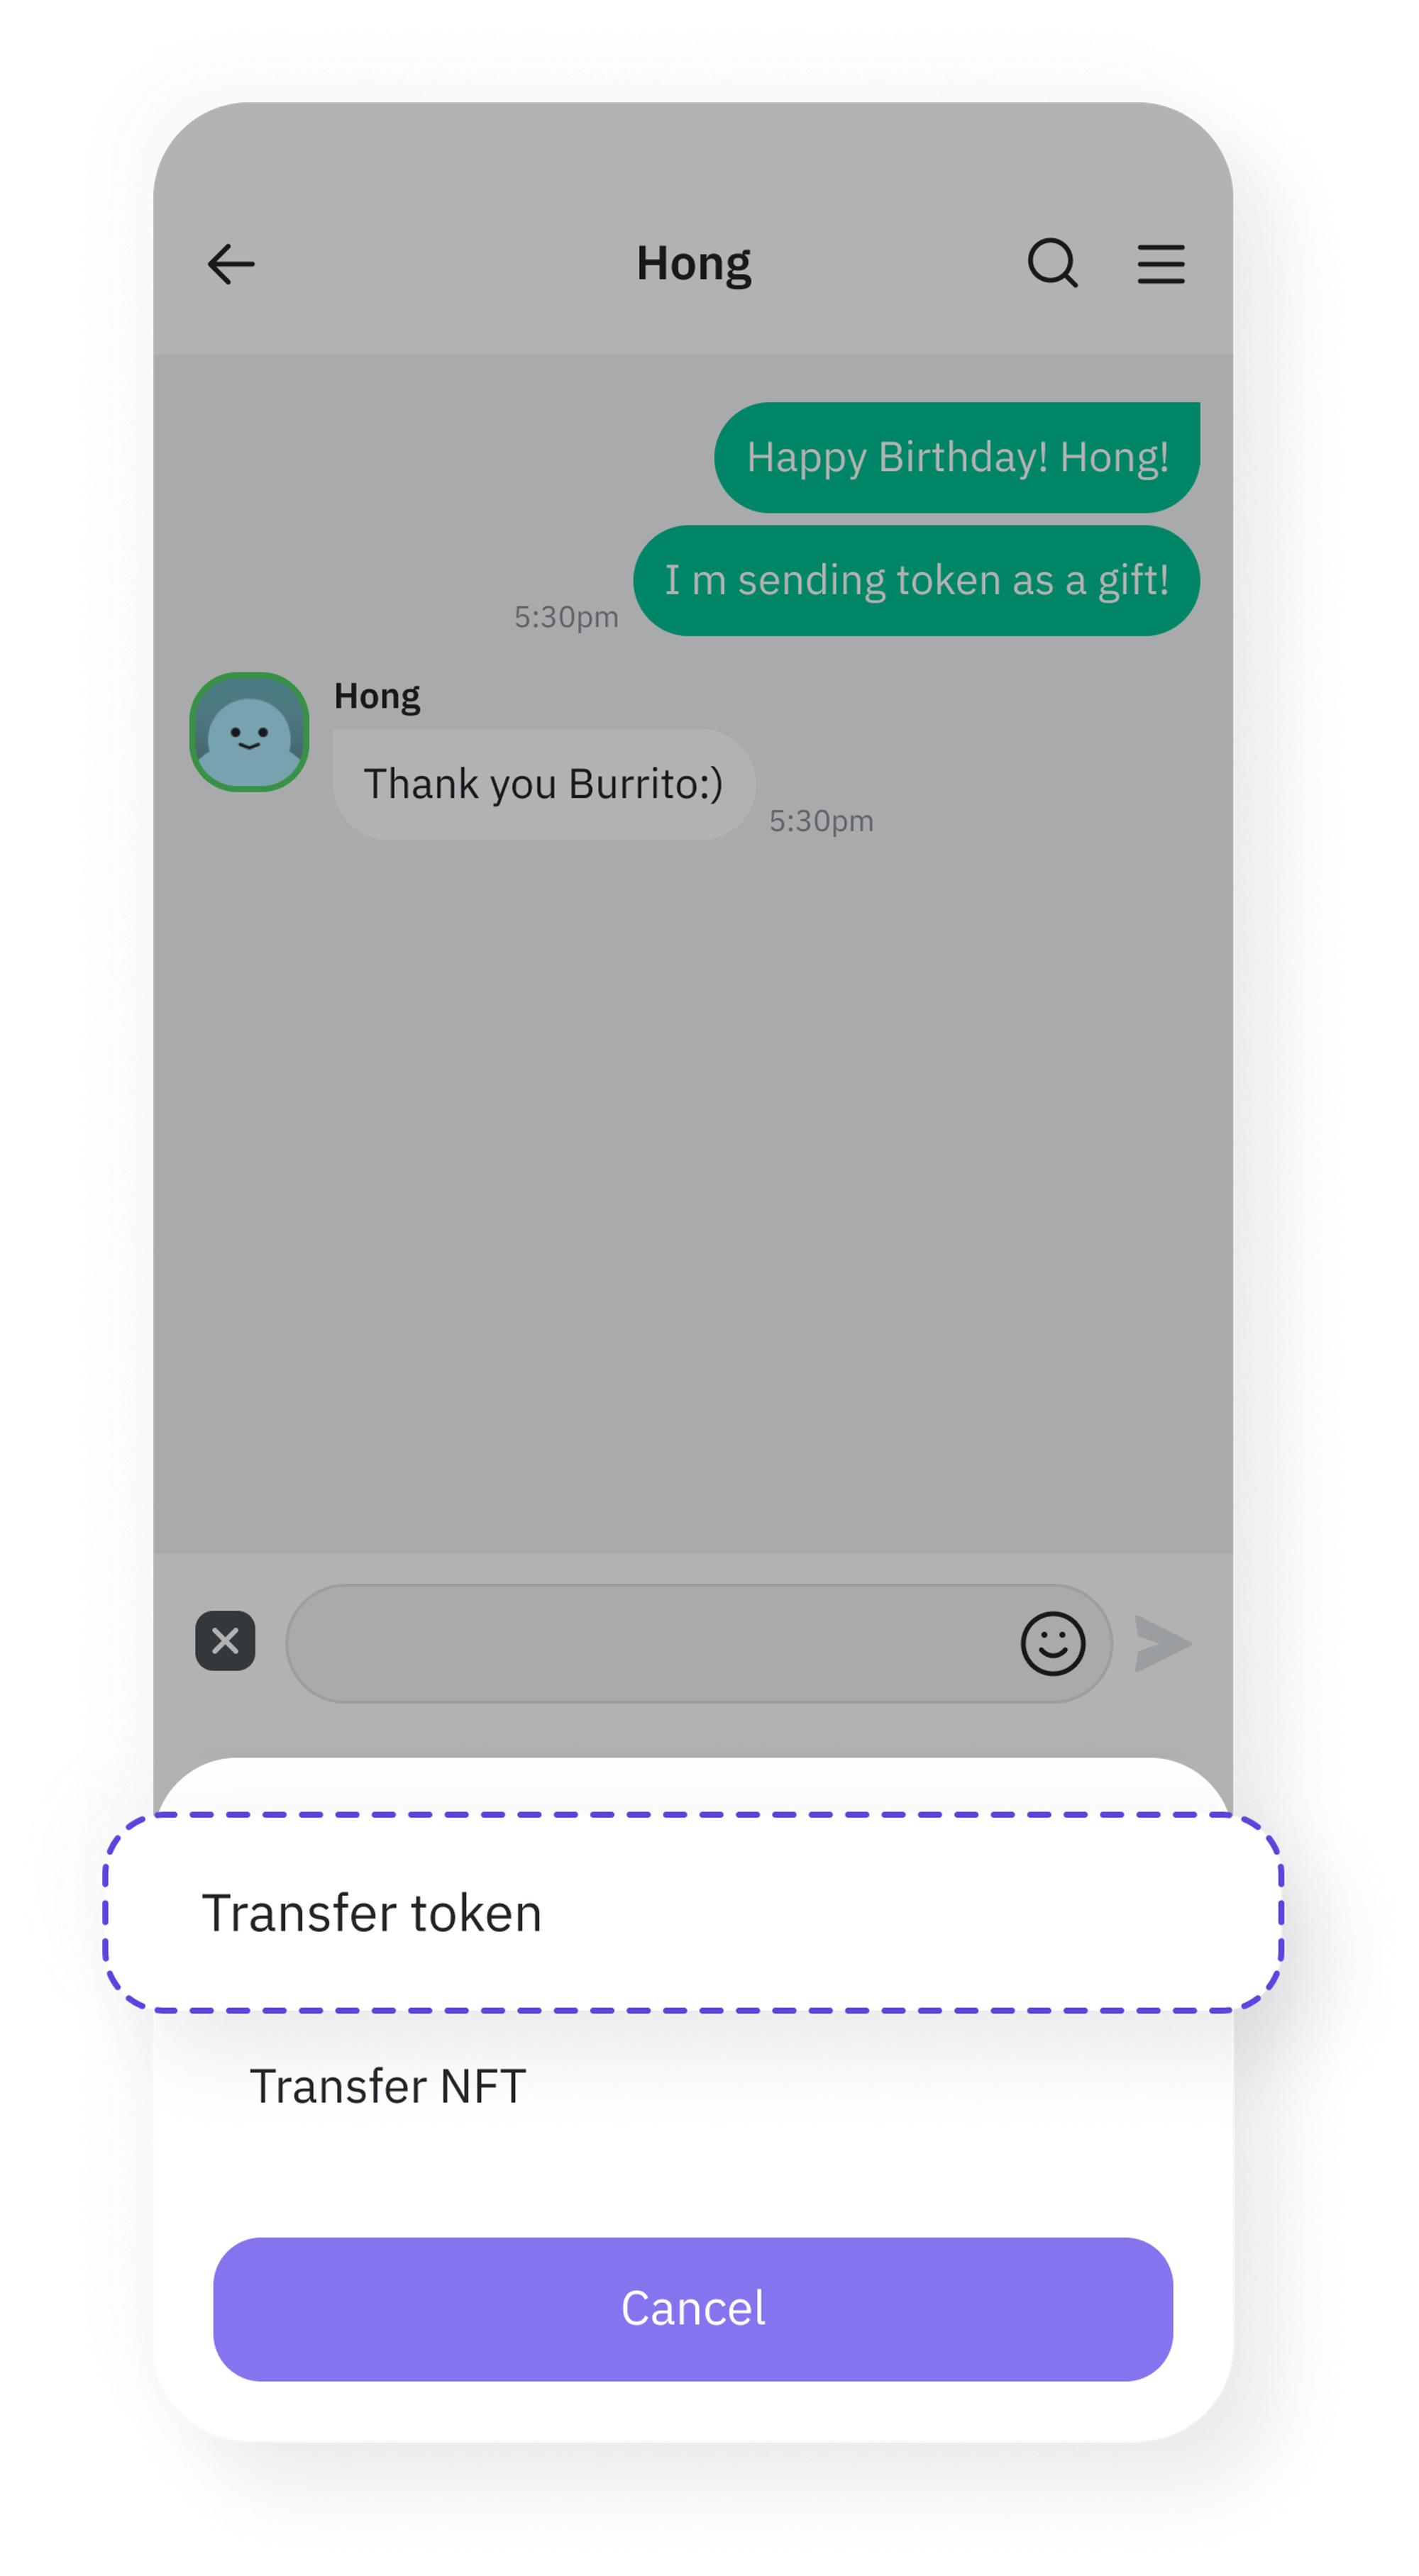 1. Chat > Remittance (Send tokens)